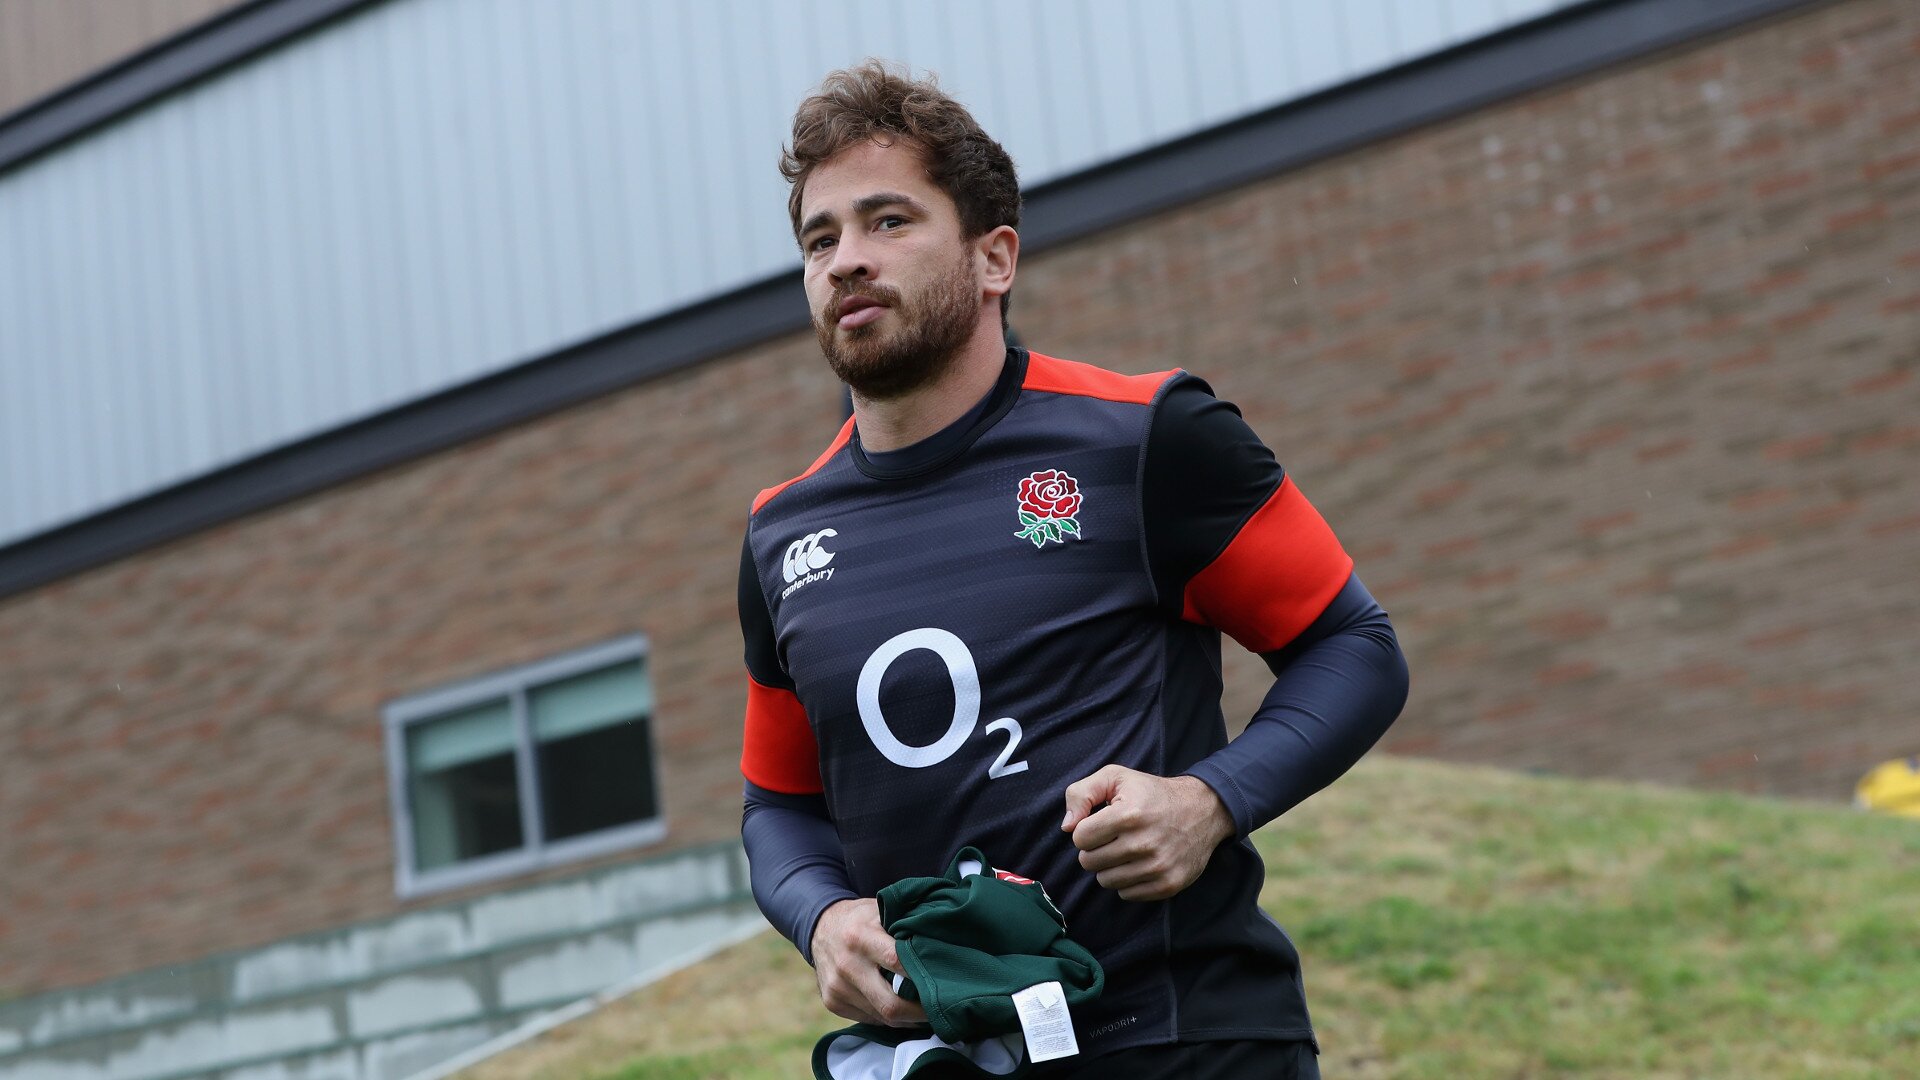 Broadcaster 'unreservedly' apologises to Danny Cipriani over Caroline Flack Tweet